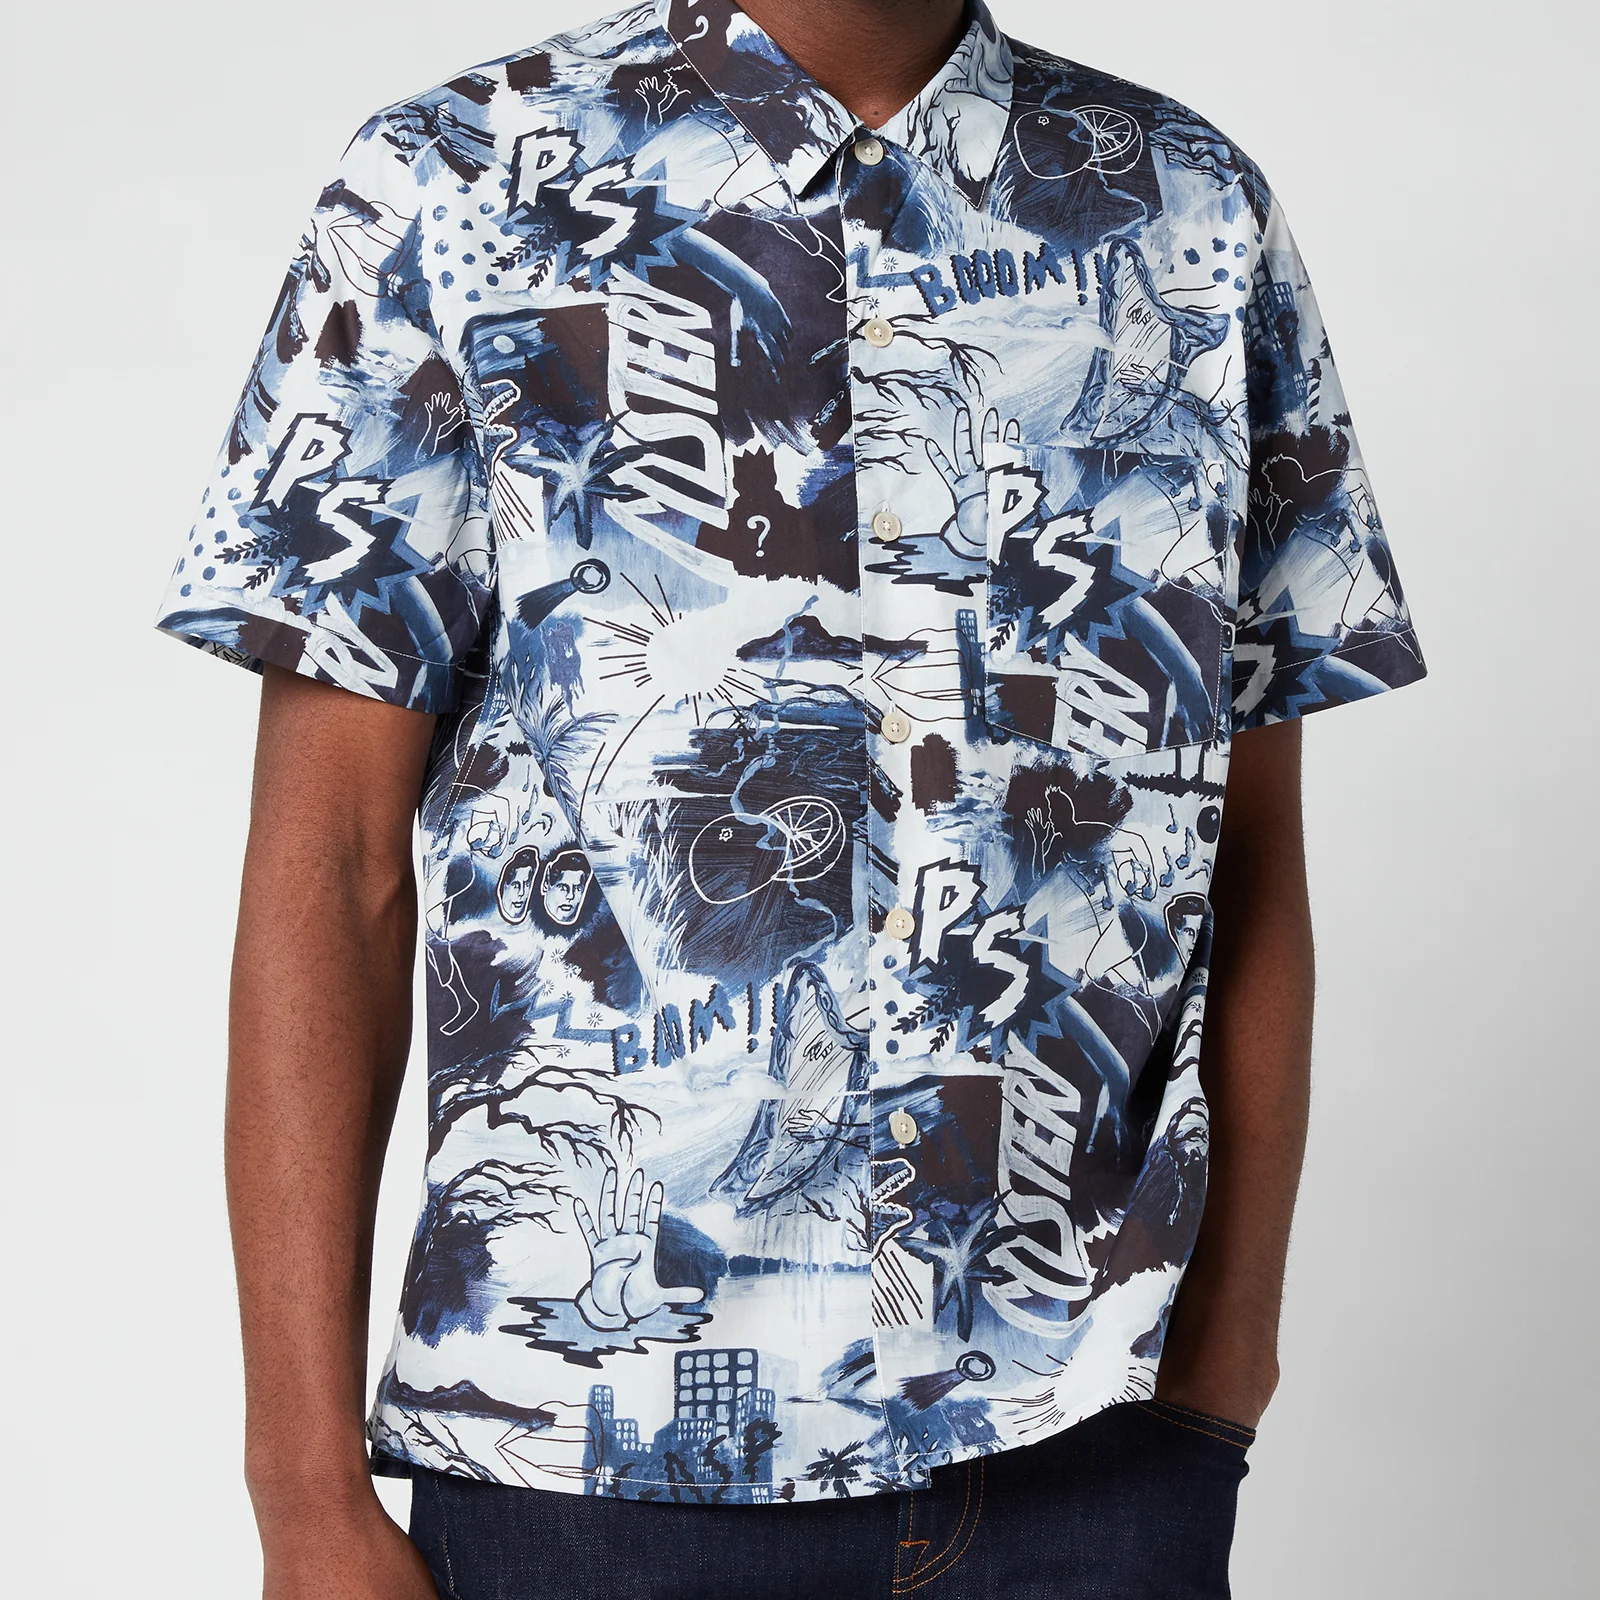 PS Paul Smith Men's Casual Fit Patterned Short Sleeve Shirt - Blue Image 1